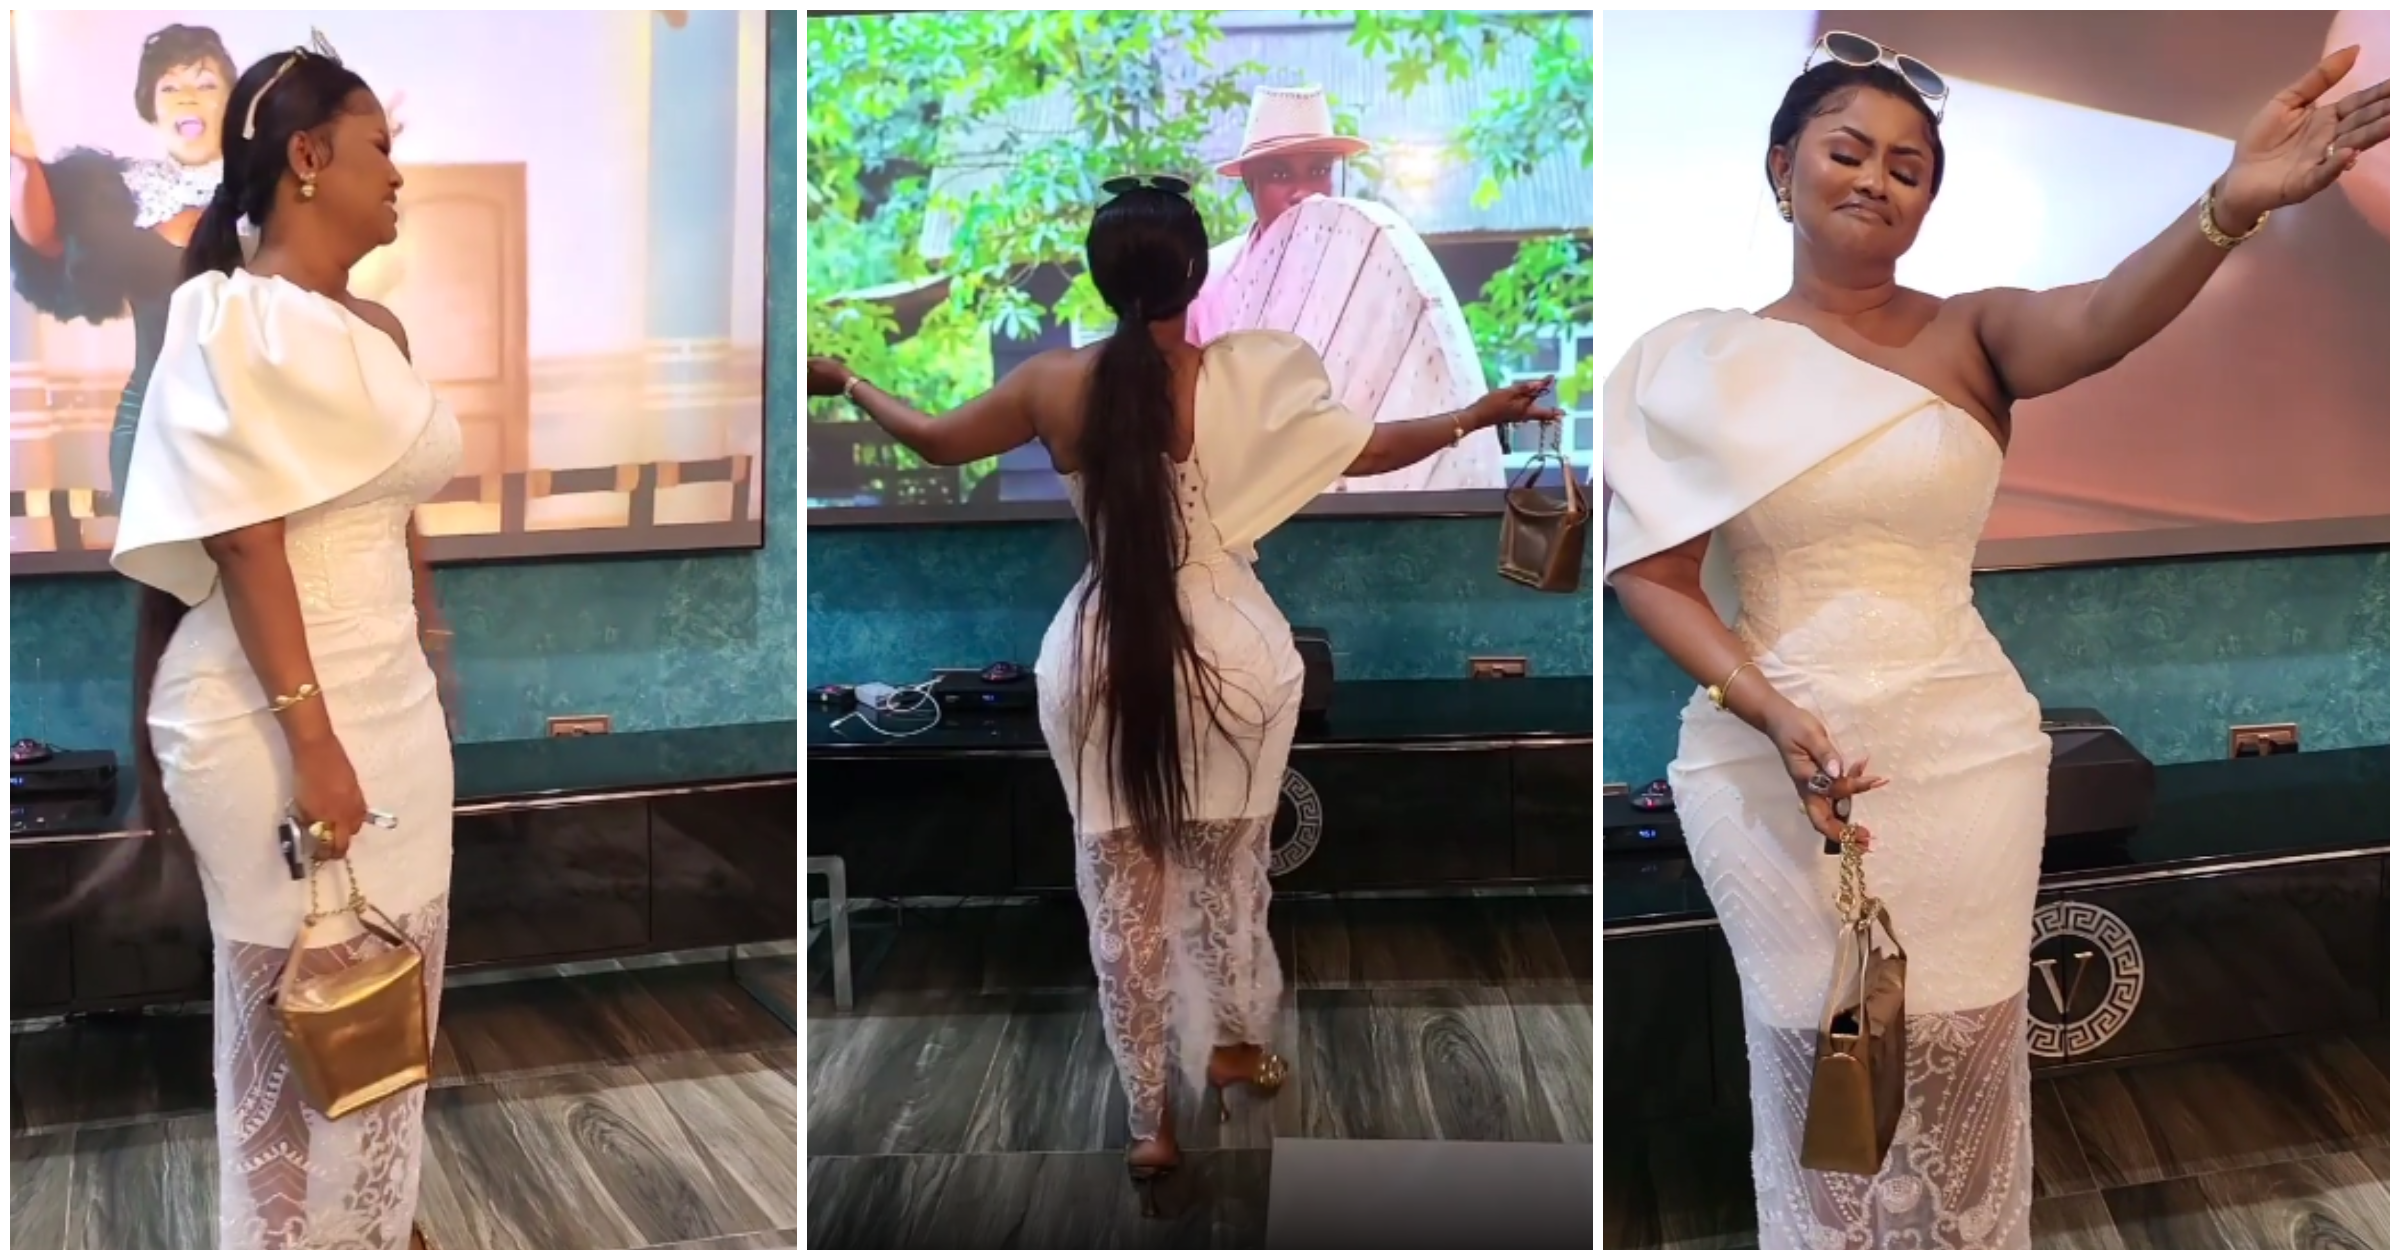 Rich and classy: Video of McBrown's plush living room with gigantic TV pops up, fans tap into her blessing